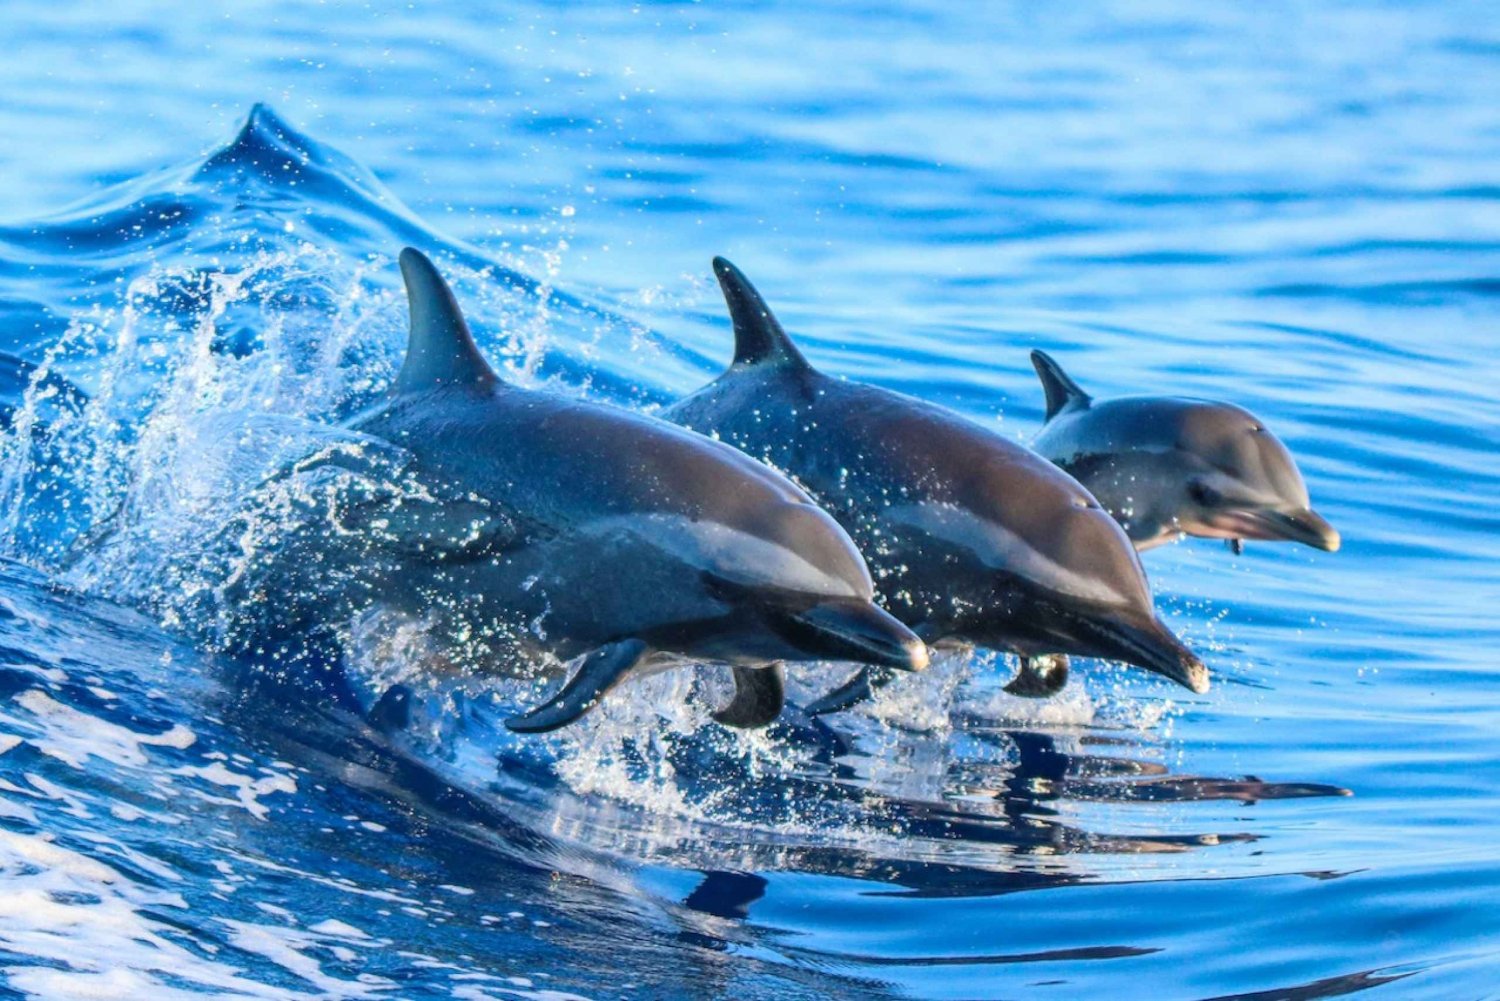 Guided Dolphin Watching & Snorkelling Experience Costa Rica